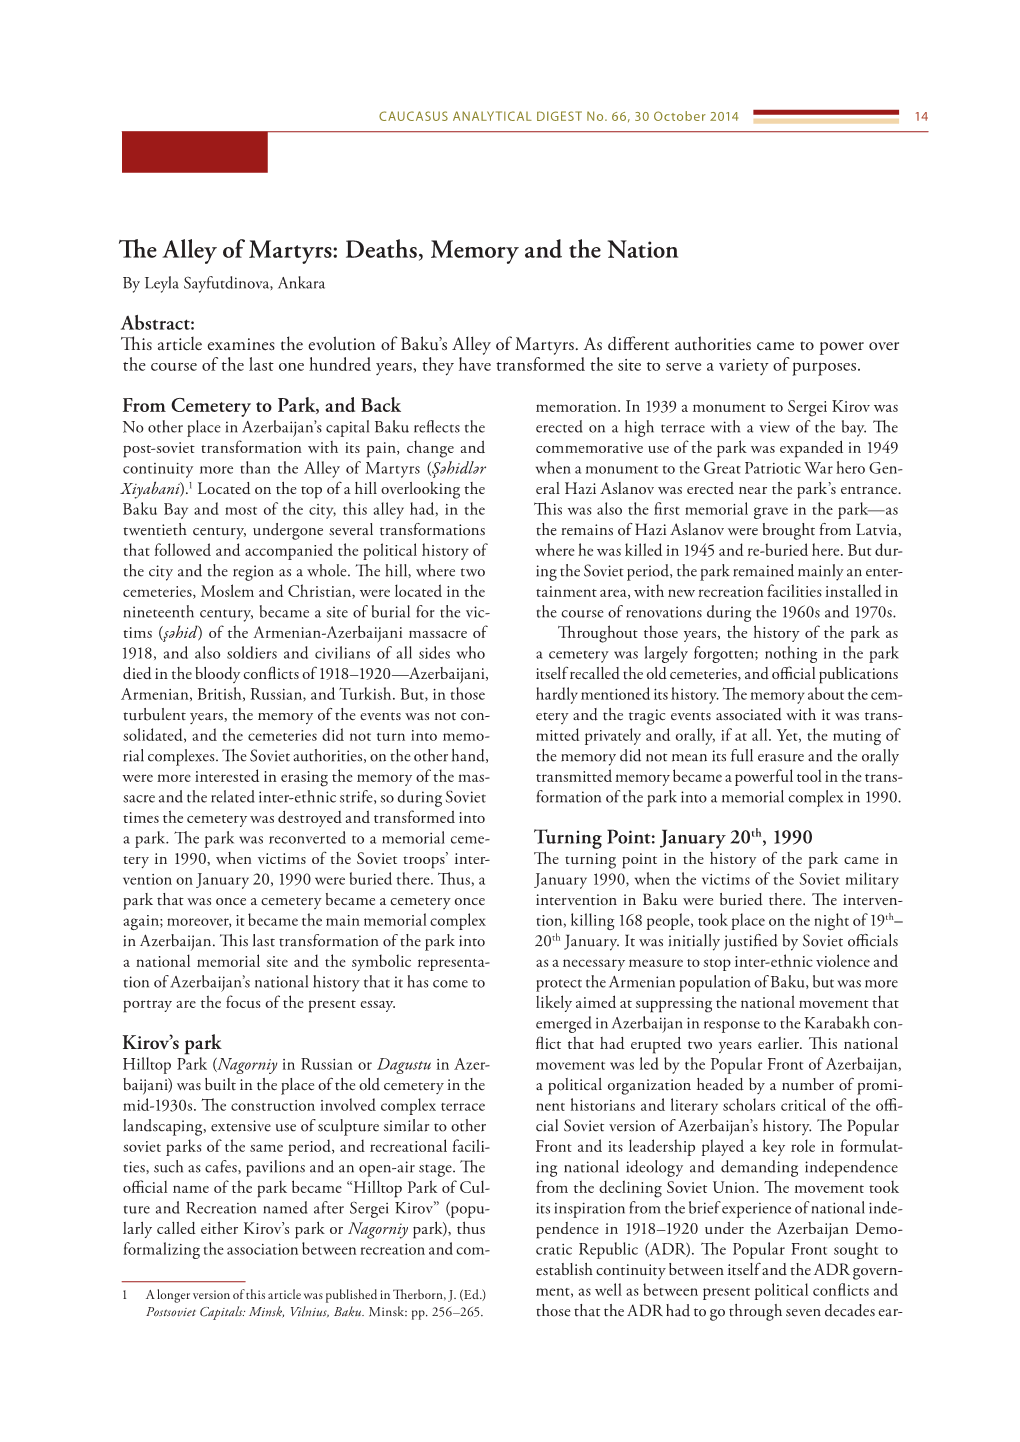 The Alley of Martyrs: Deaths, Memory and the Nation by Leyla Sayfutdinova, Ankara Abstract: This Article Examines the Evolution of Baku’S Alley of Martyrs